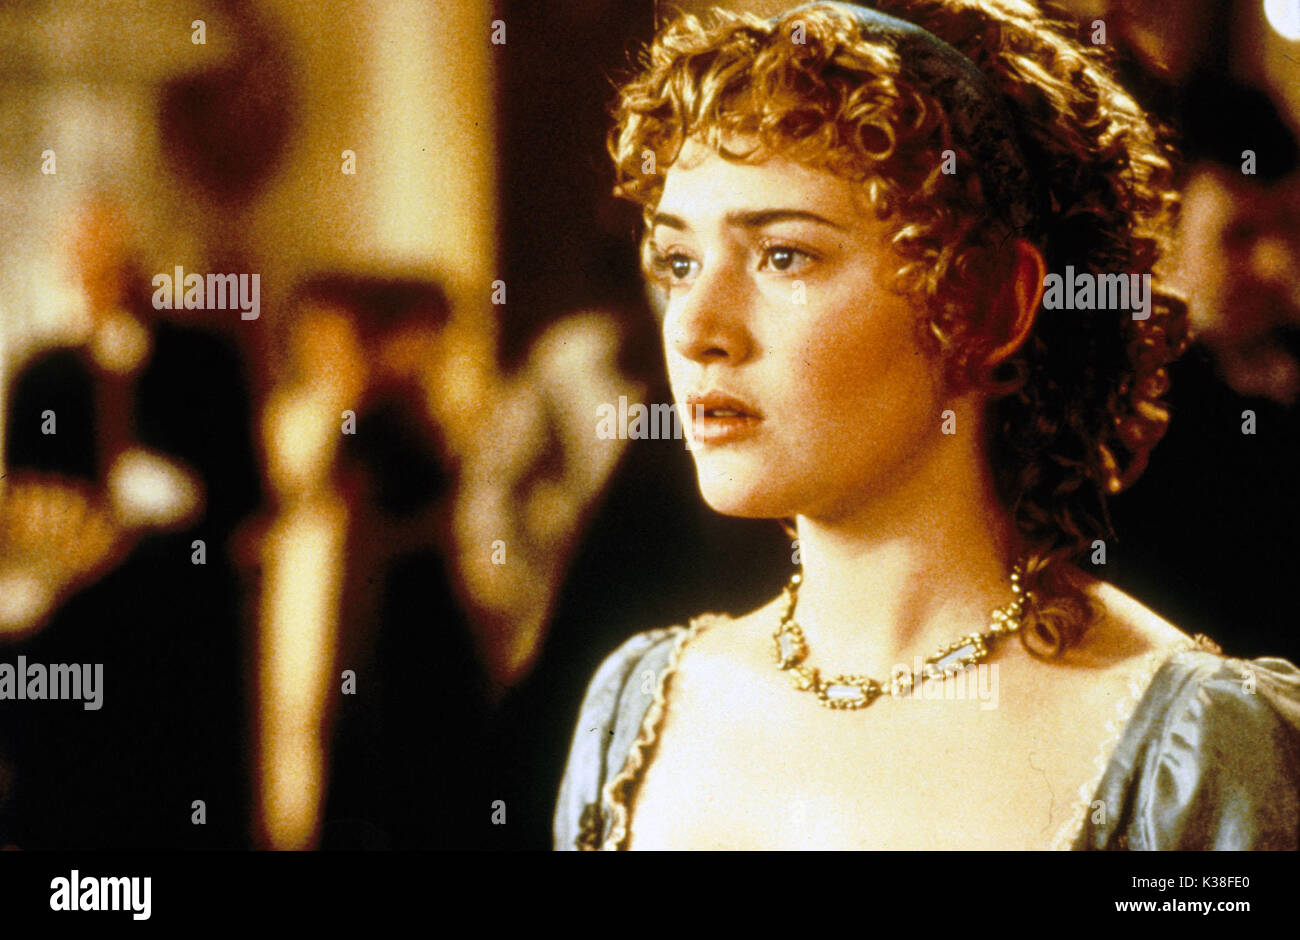 SENSE AND SENSIBILITY KATE WINSLET DIRECTOR: ANG LEE AUTHOR: JANE FILM RELEASE BY COLUMBIA PICTURES CORPORATION Date: 1995 Stock Photo -